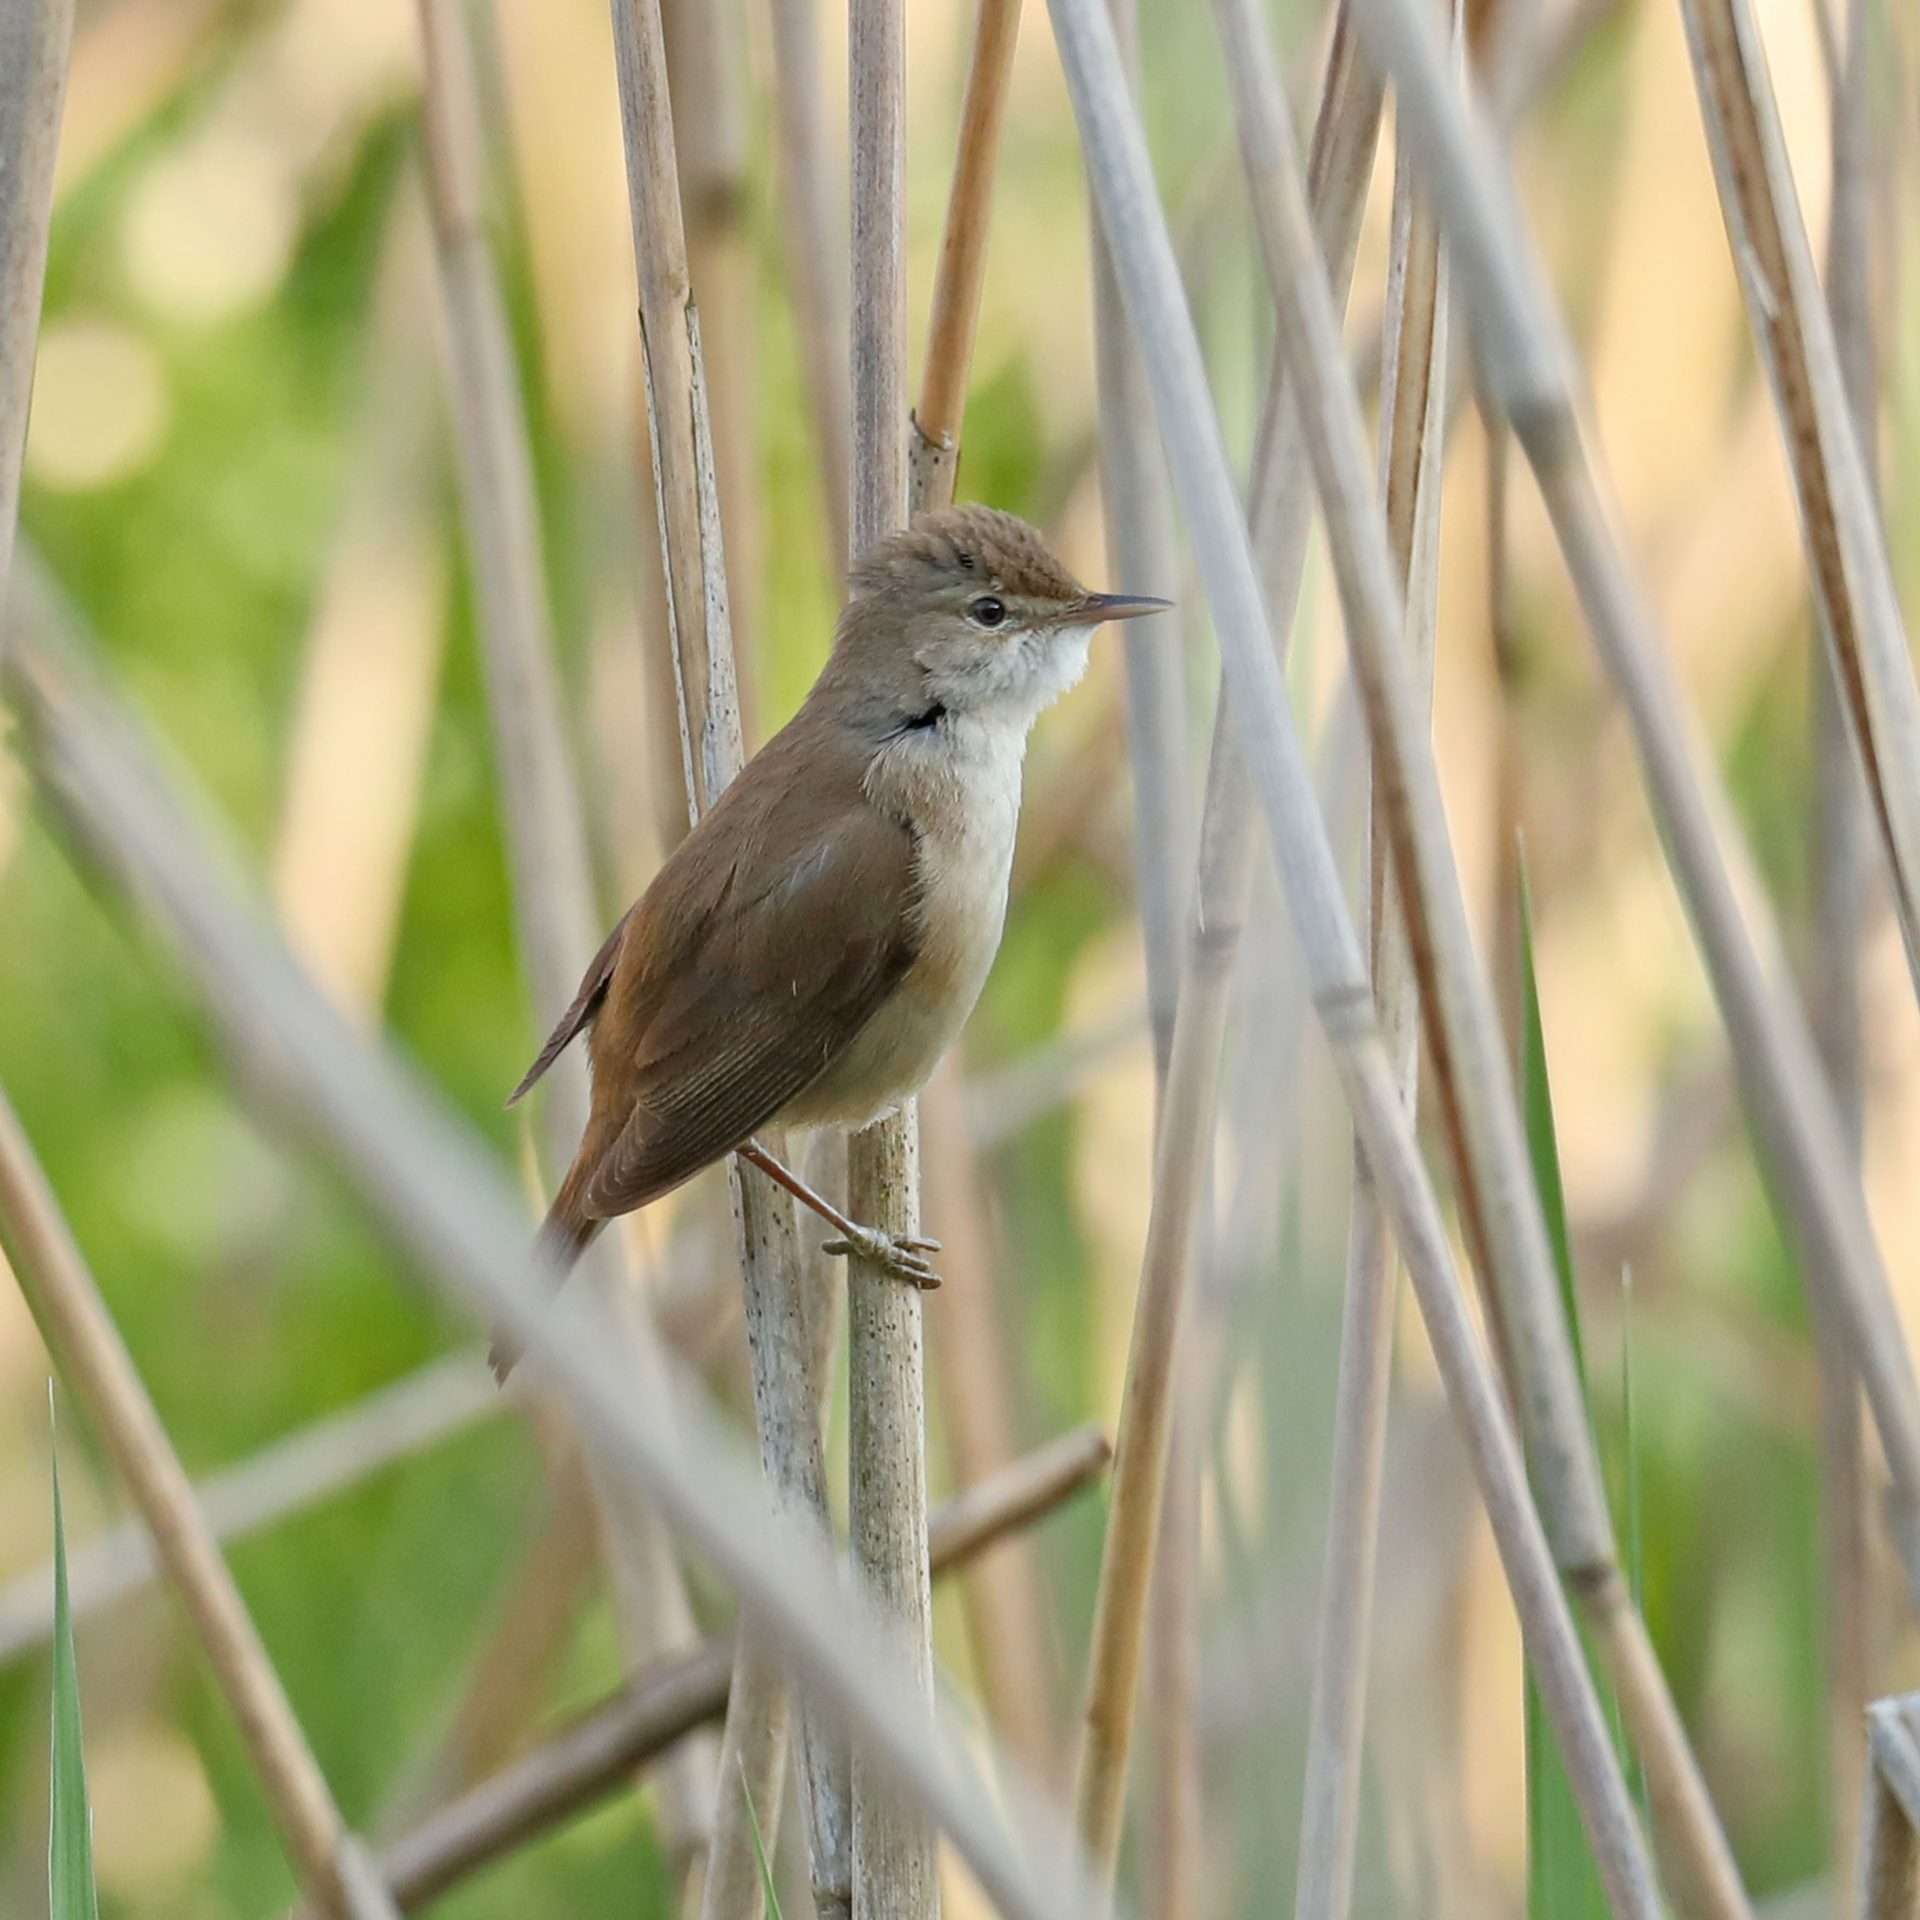 Reed Warbler by Steve Hopper at Newton Abbot